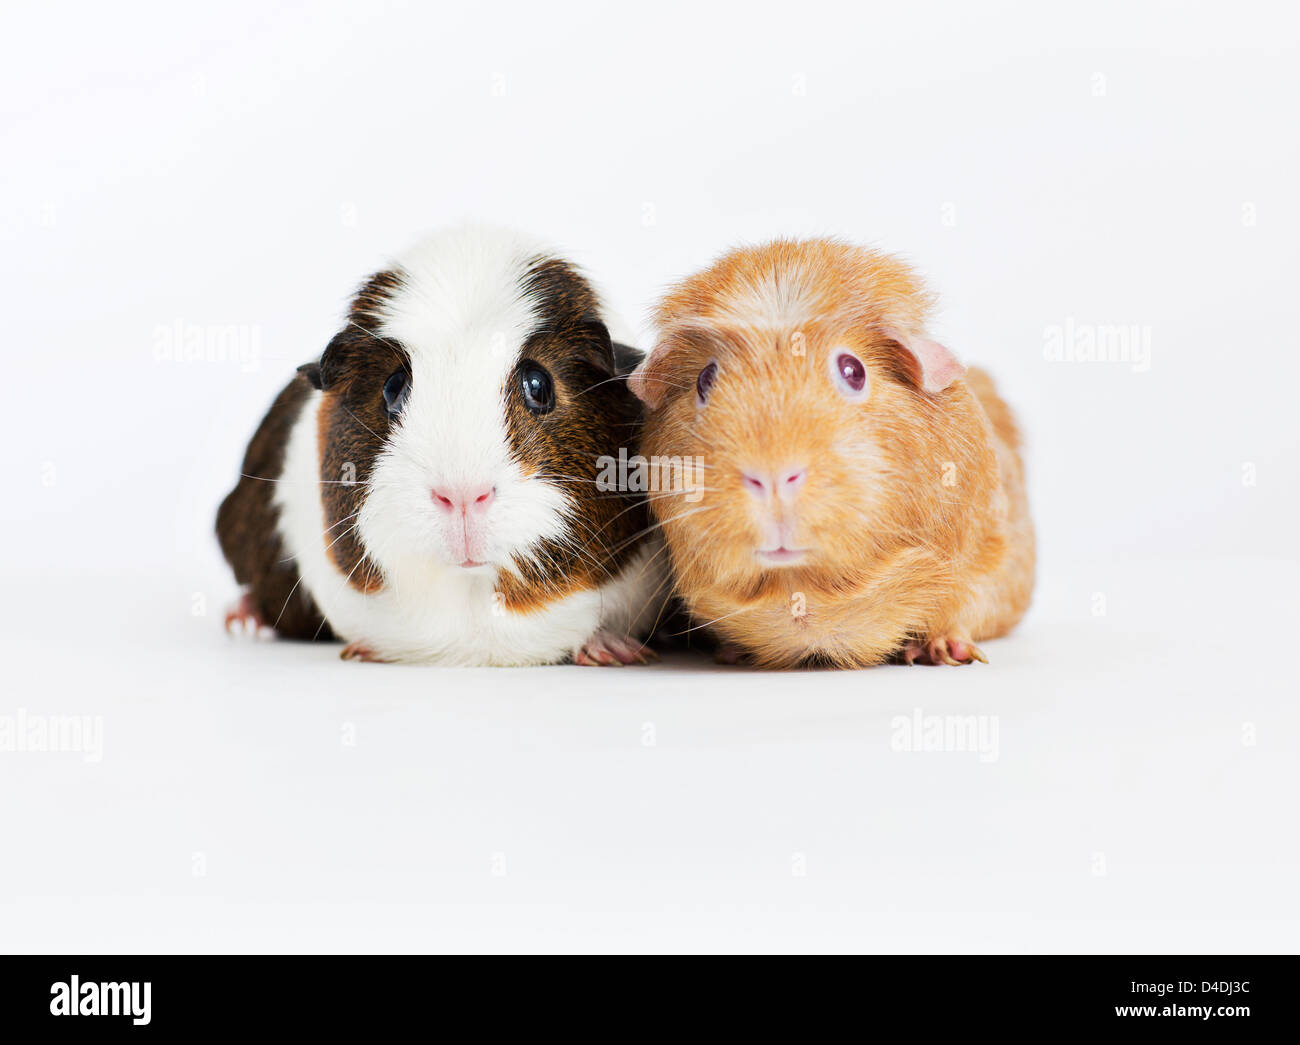 Guinea pigs sitting together Stock Photo